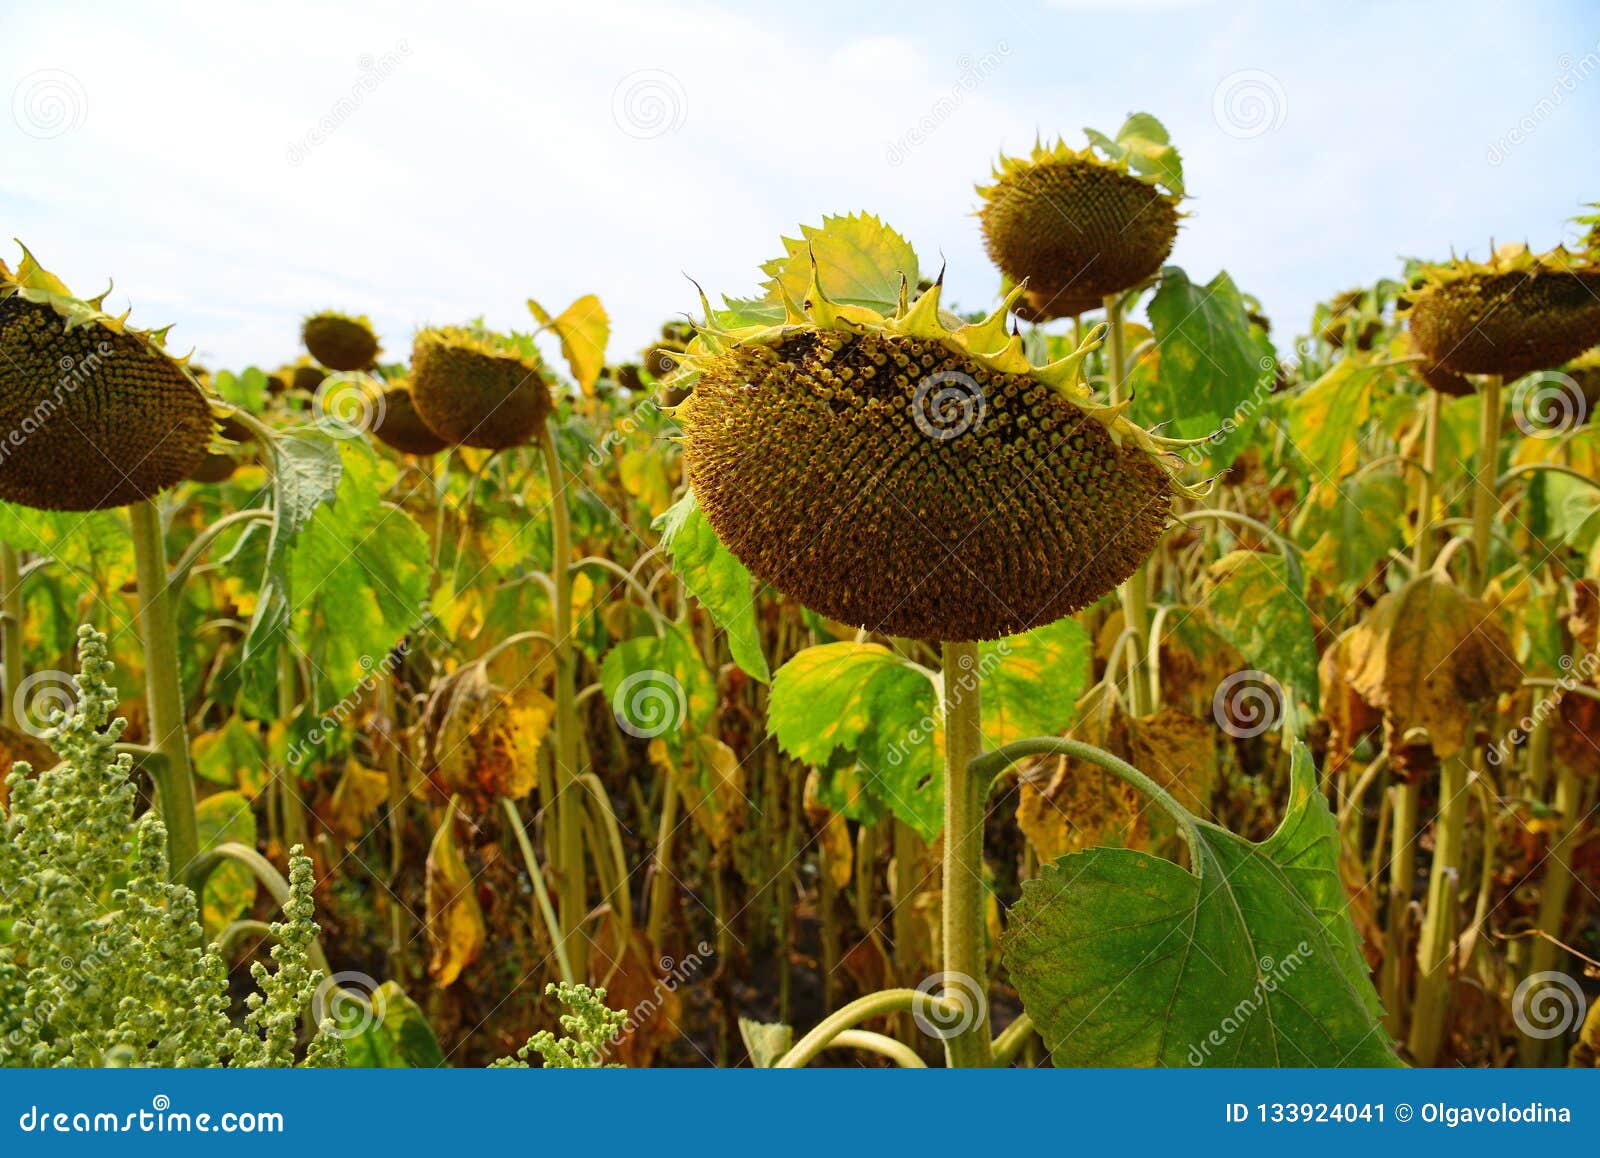 Field of Ripe Big Sunflower in August in Russia Stock Image - Image of ...